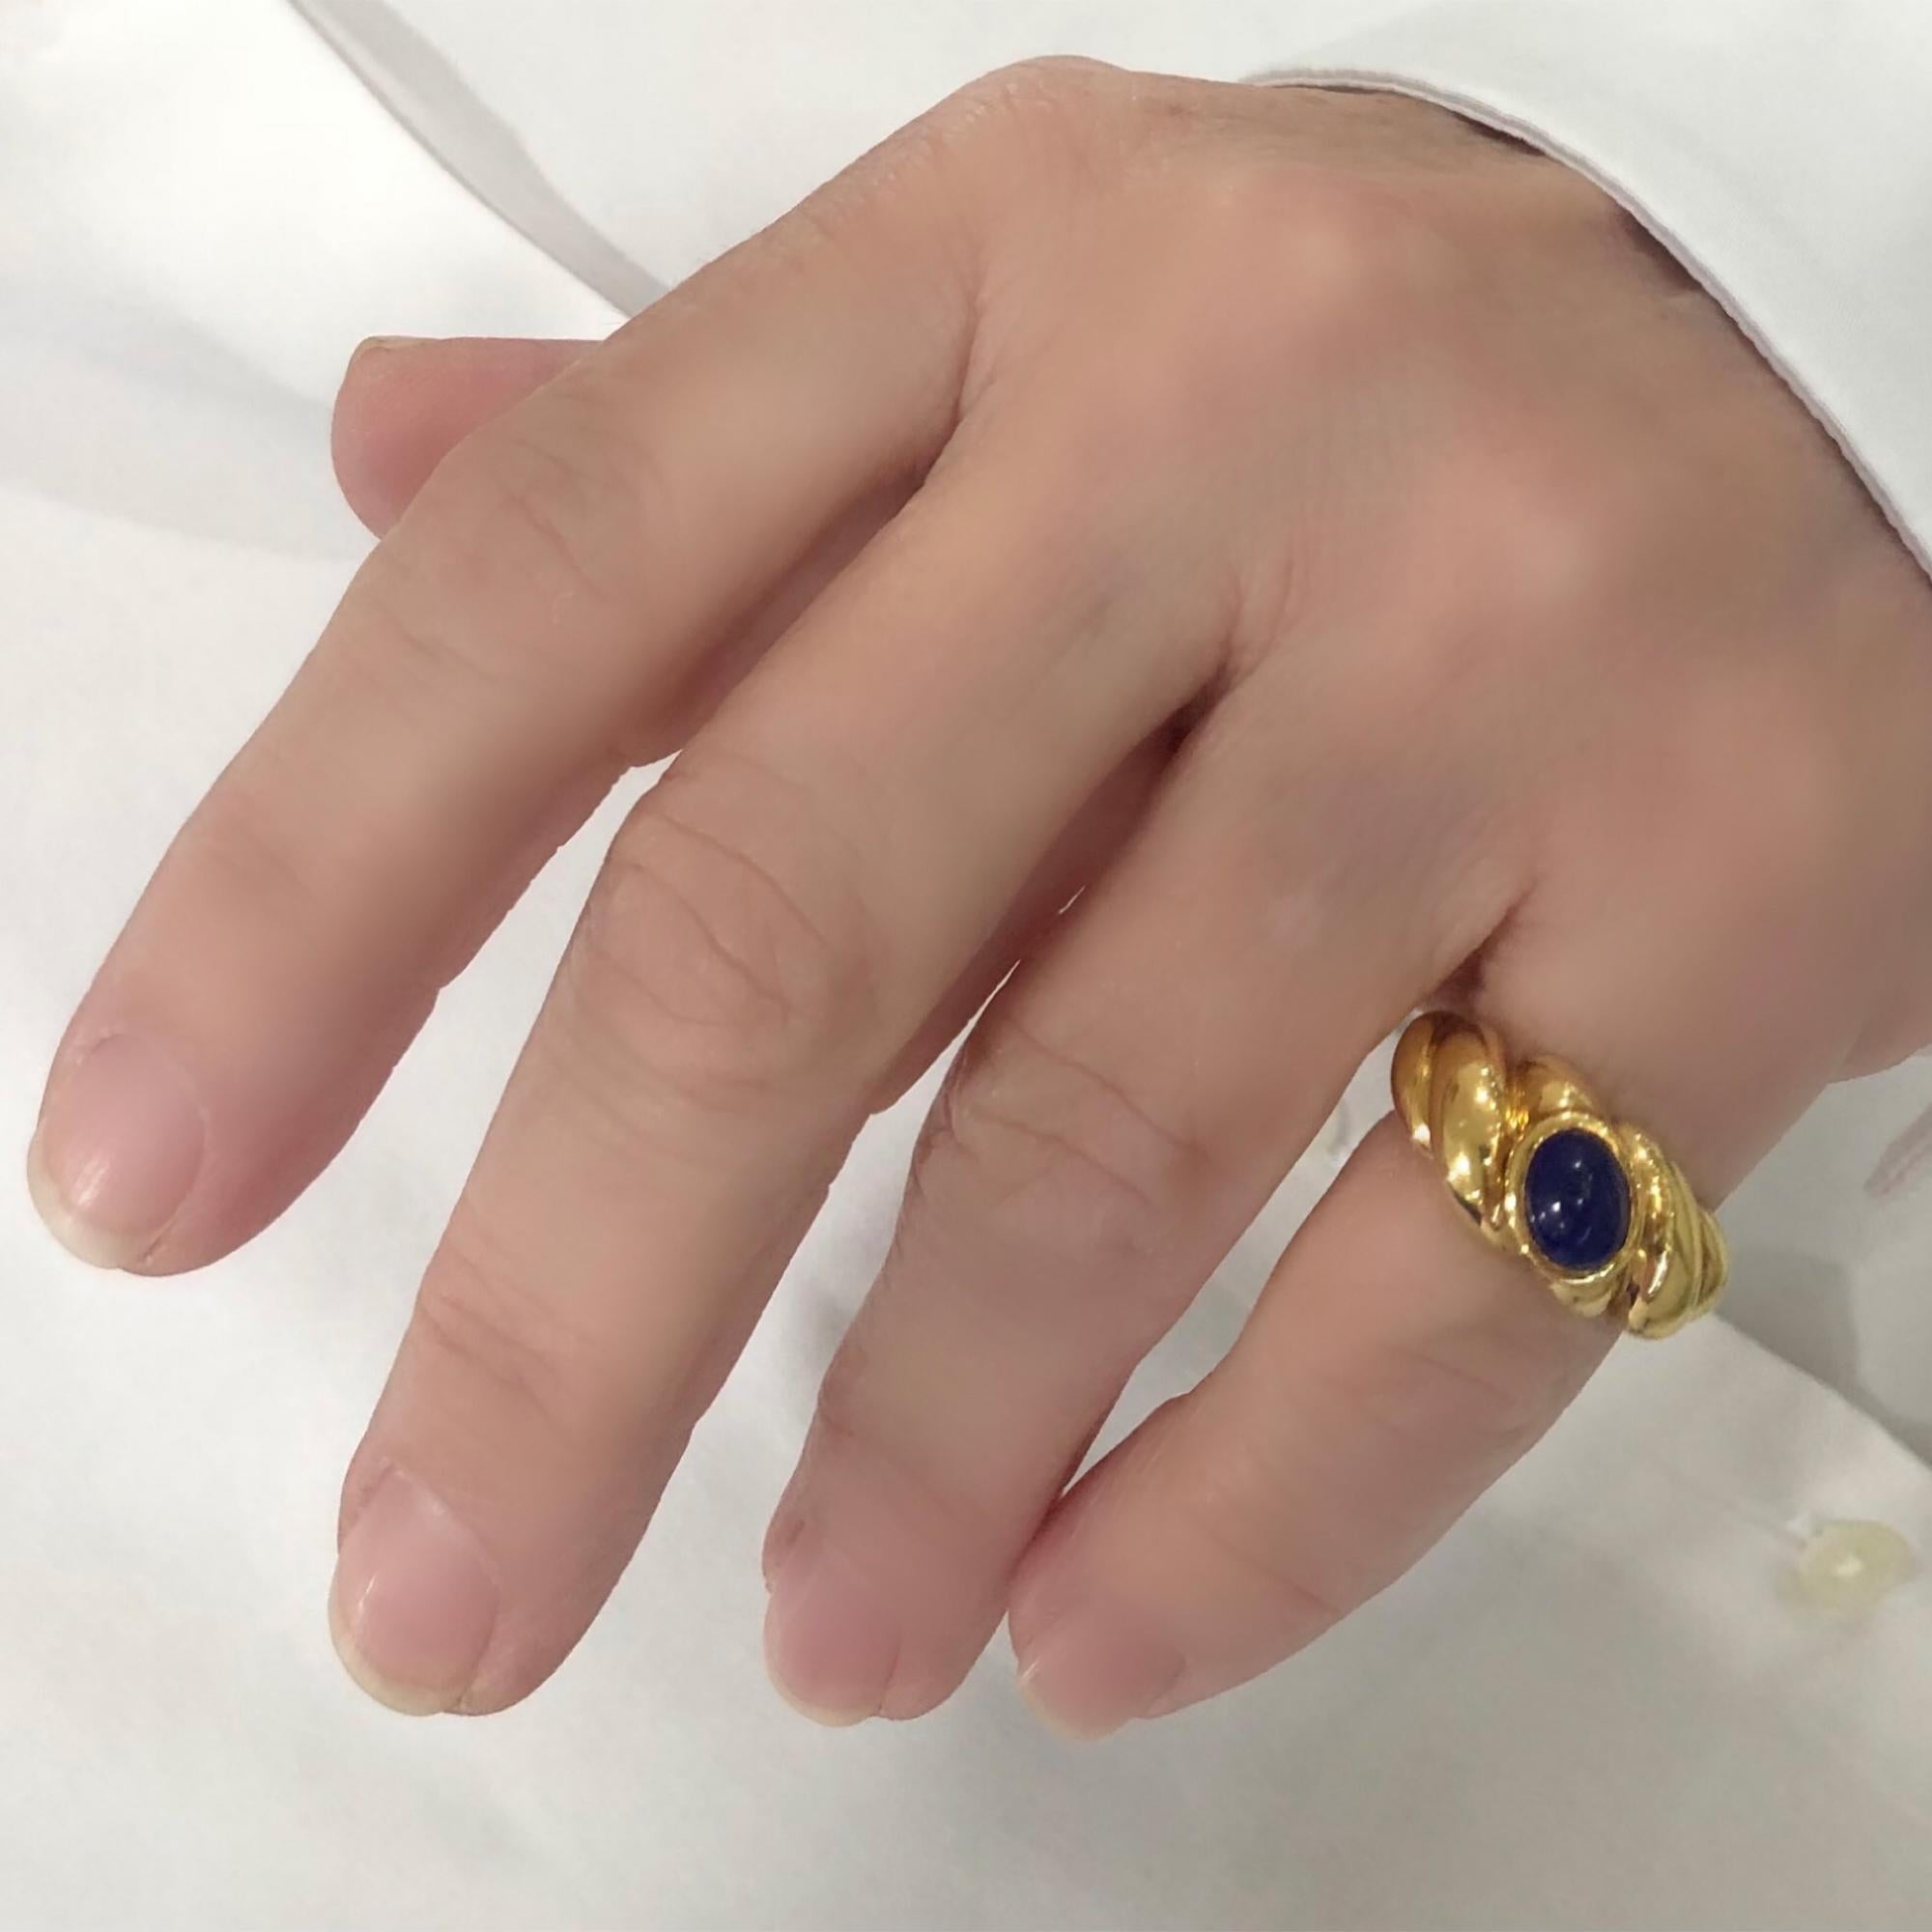 Van Cleef & Arpels Lapis Lazuli Cabochon Ring Set in 18k Yellow Gold For Sale 1